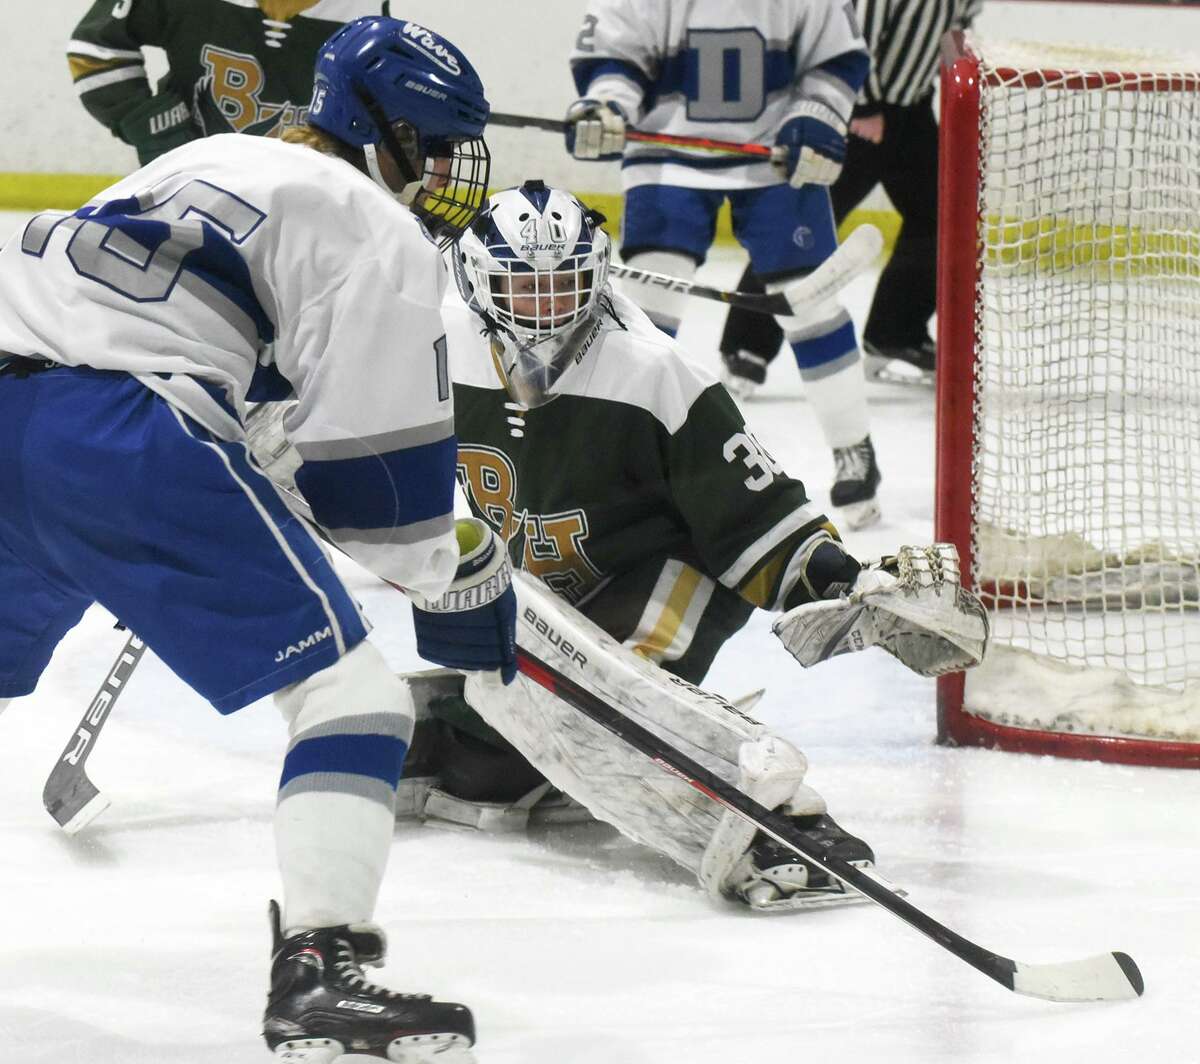 Bishop Hendricken goalie Colin Murray protects the net against a shot from Darien’s Billy Branca (15) during a game last Saturday.